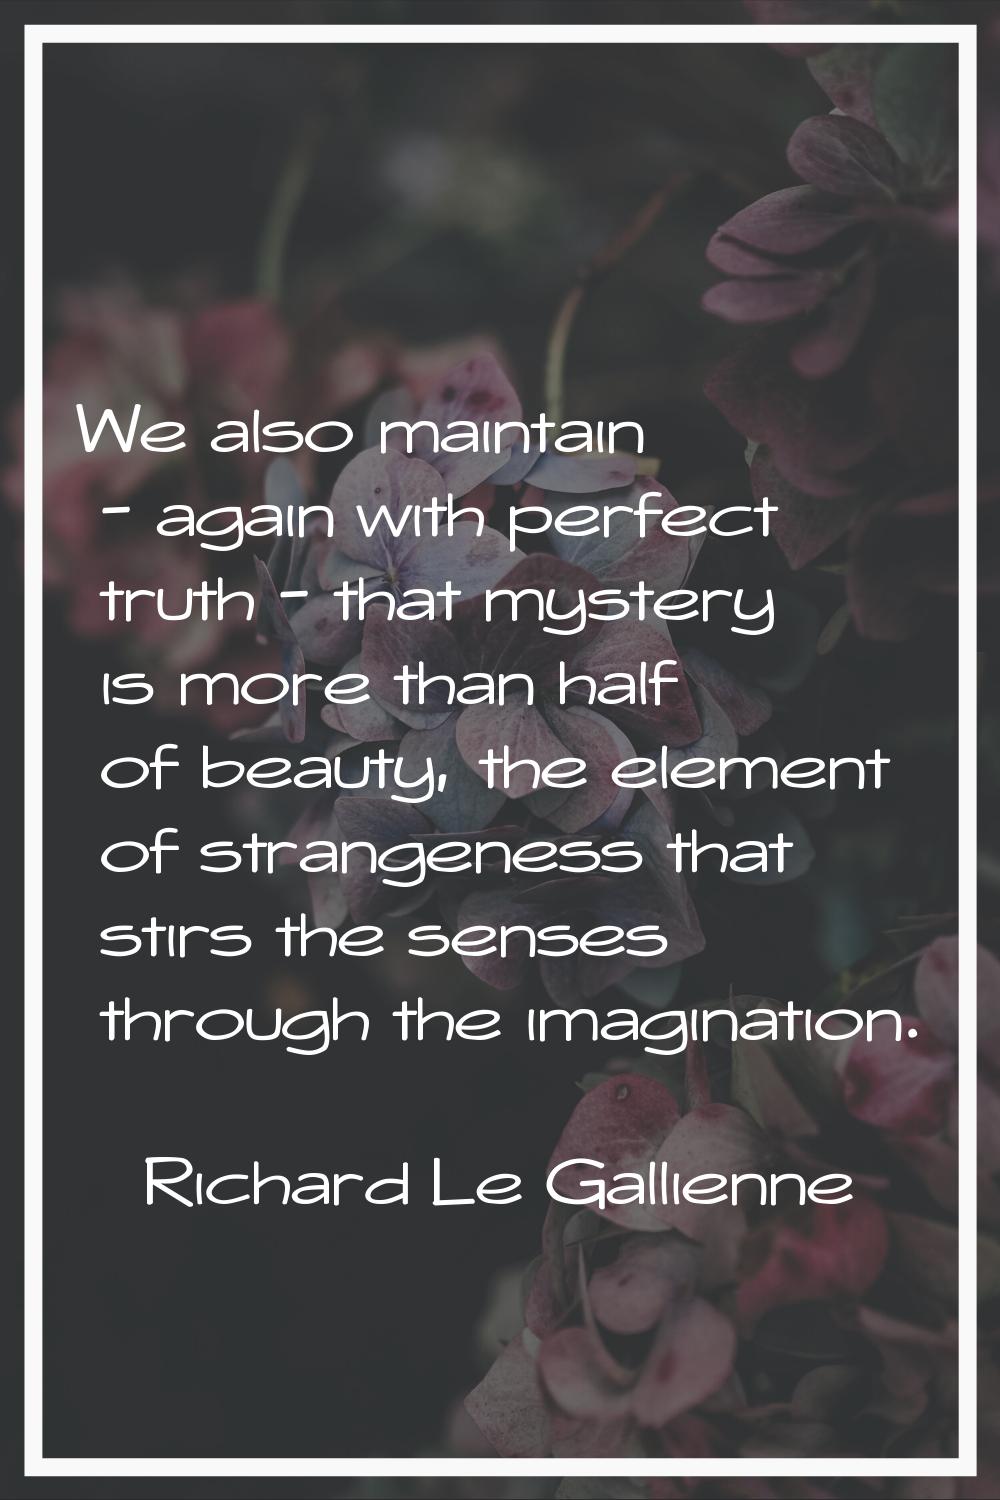 We also maintain - again with perfect truth - that mystery is more than half of beauty, the element